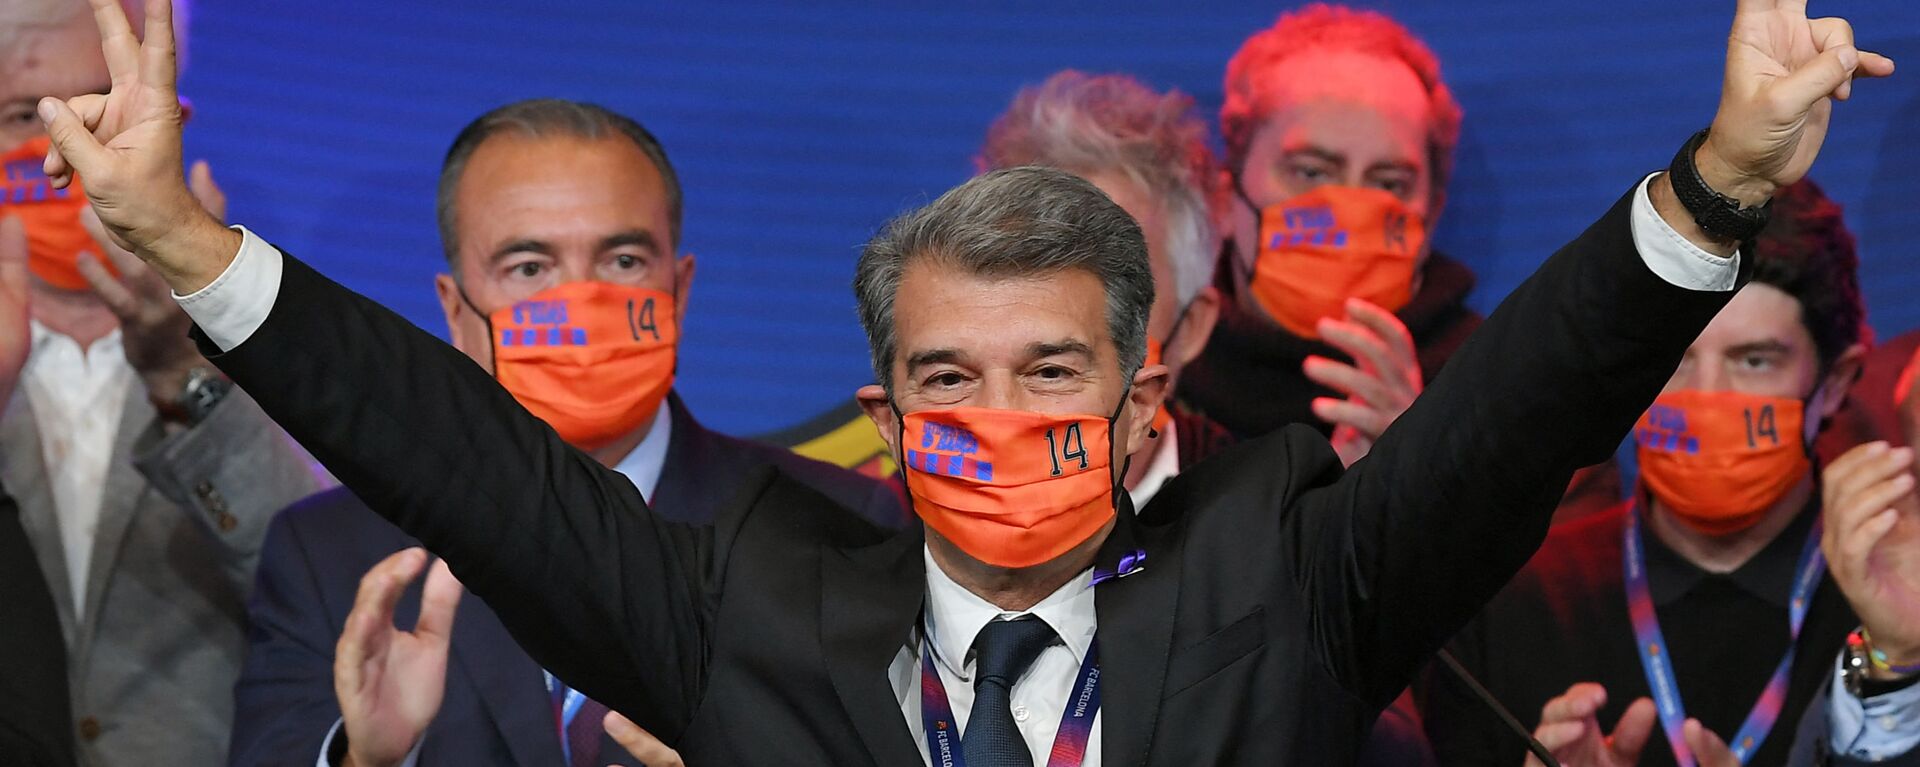 Spanish lawyer Joan Laporta celebrates his victory at the auditorium of the Camp Nou complex after winning the election for the FC Barcelona presidency on March 7, 2021 in Barcelona. - اسپوتنیک افغانستان  , 1920, 08.03.2021